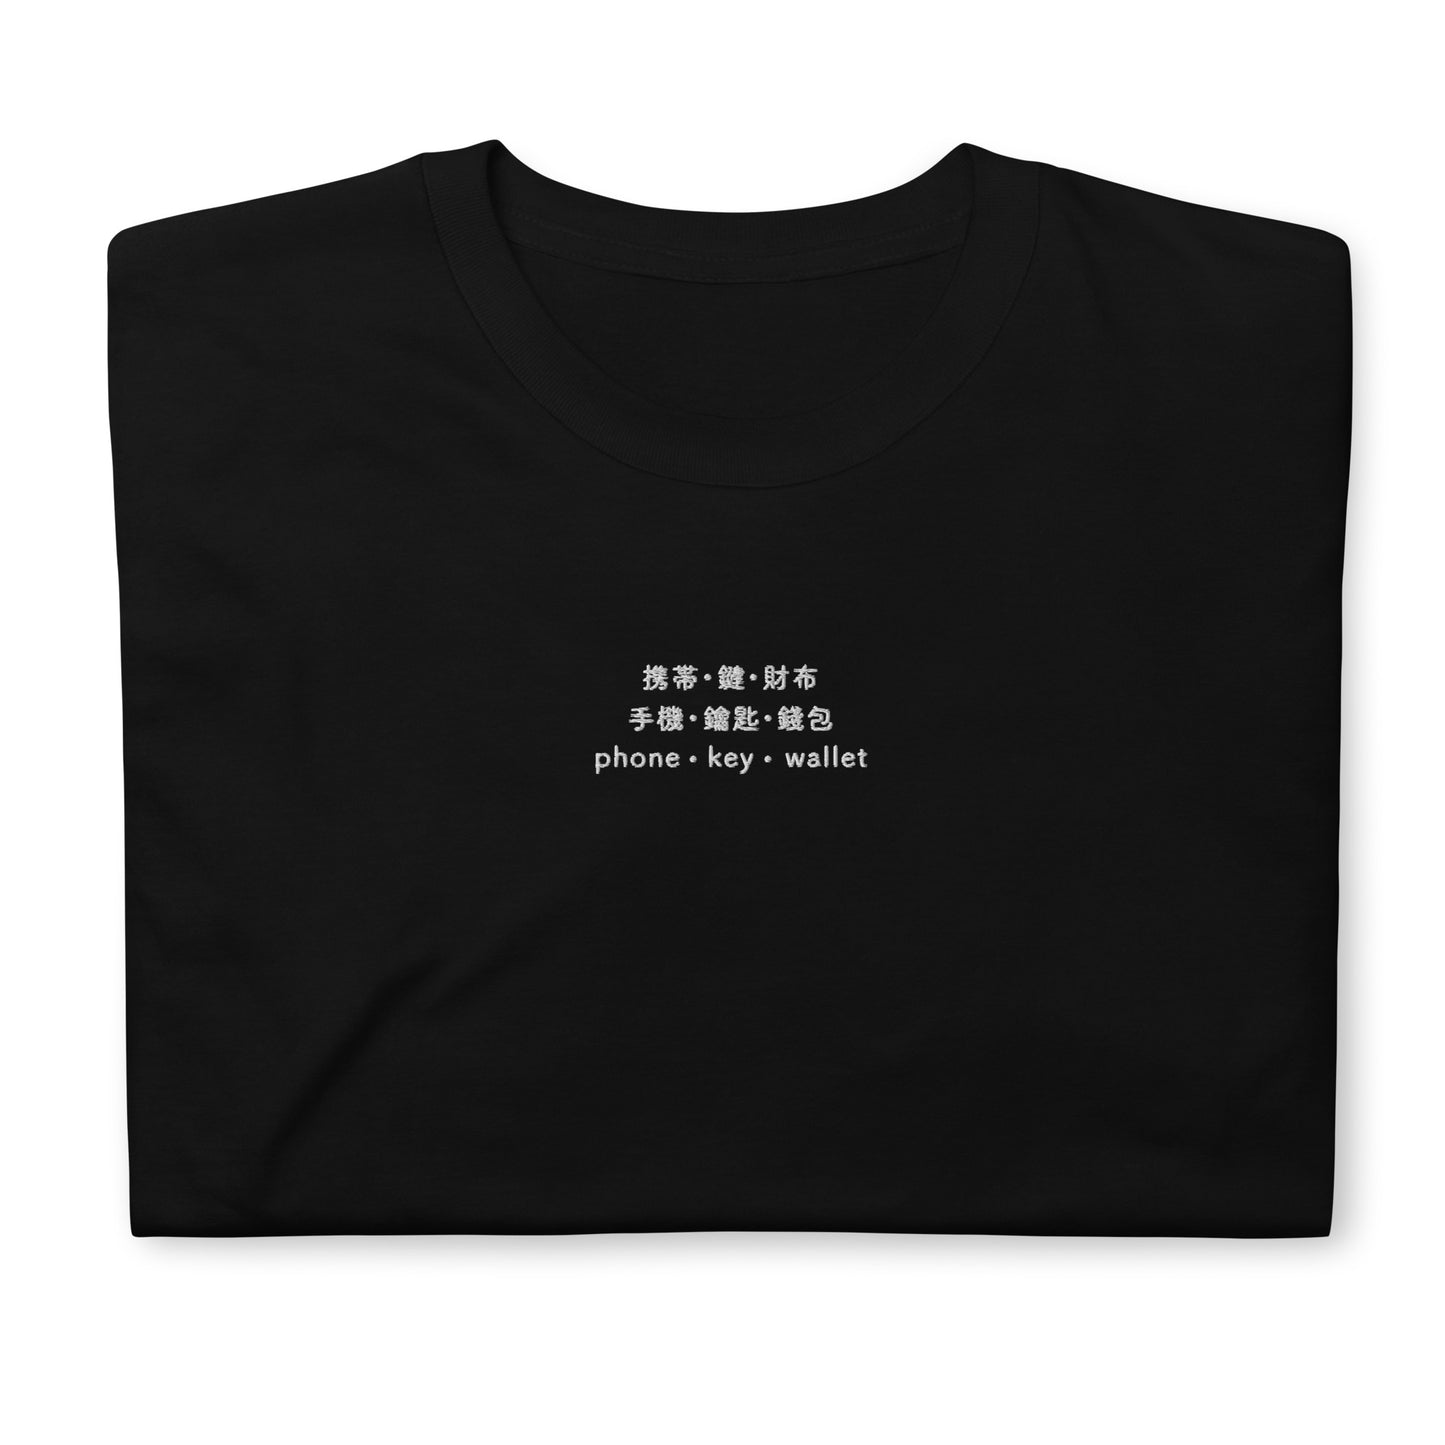 Black High Quality Tee - Front Design with an White Embroidery "Phone/Key/Wallet" in Japanese,Chinese and English